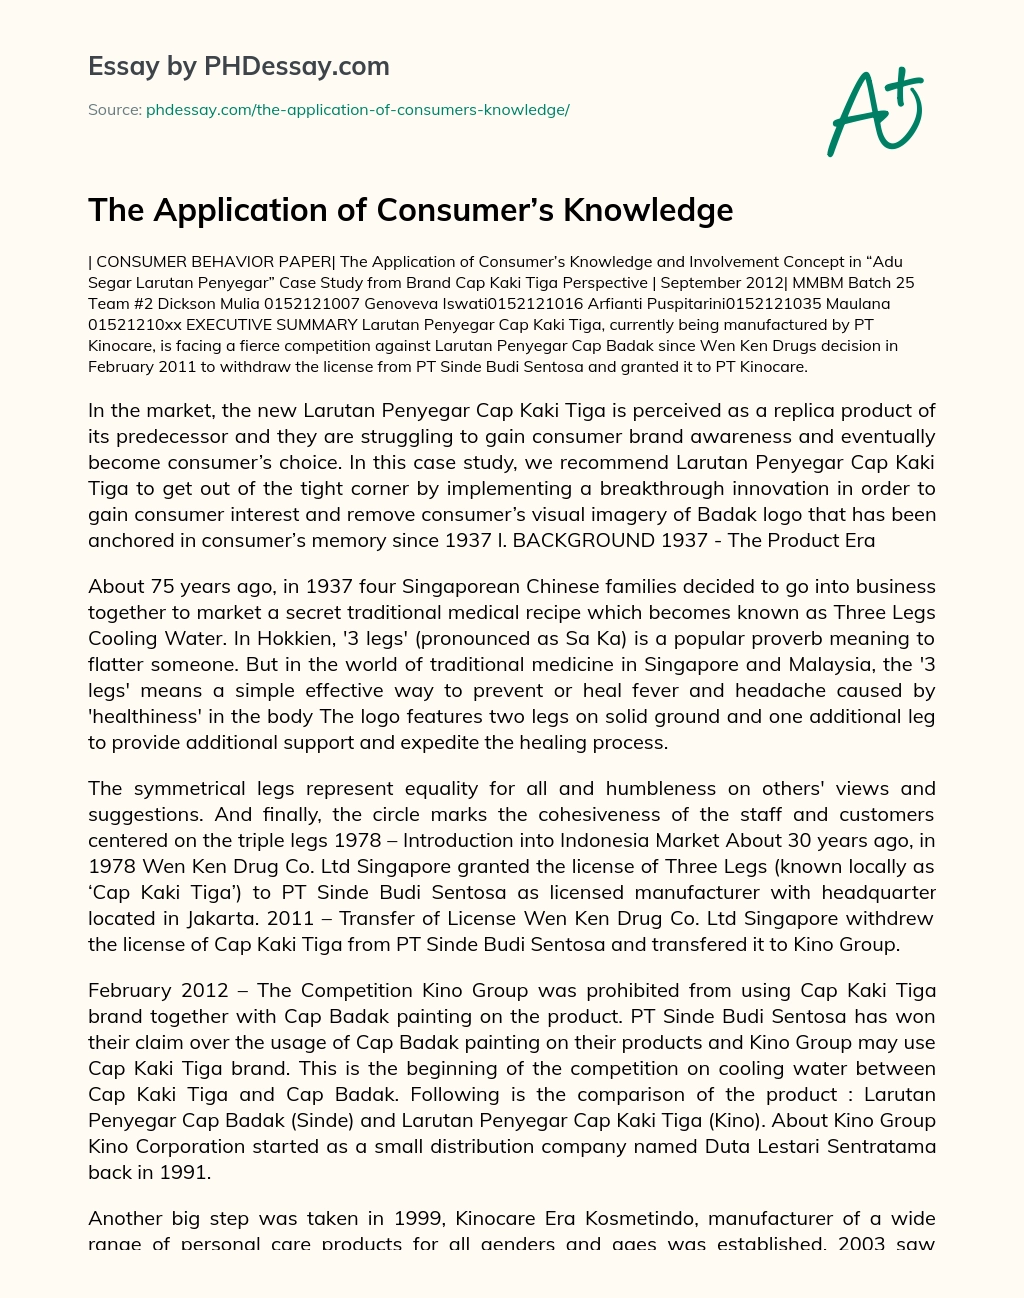 The Application of Consumer’s Knowledge essay